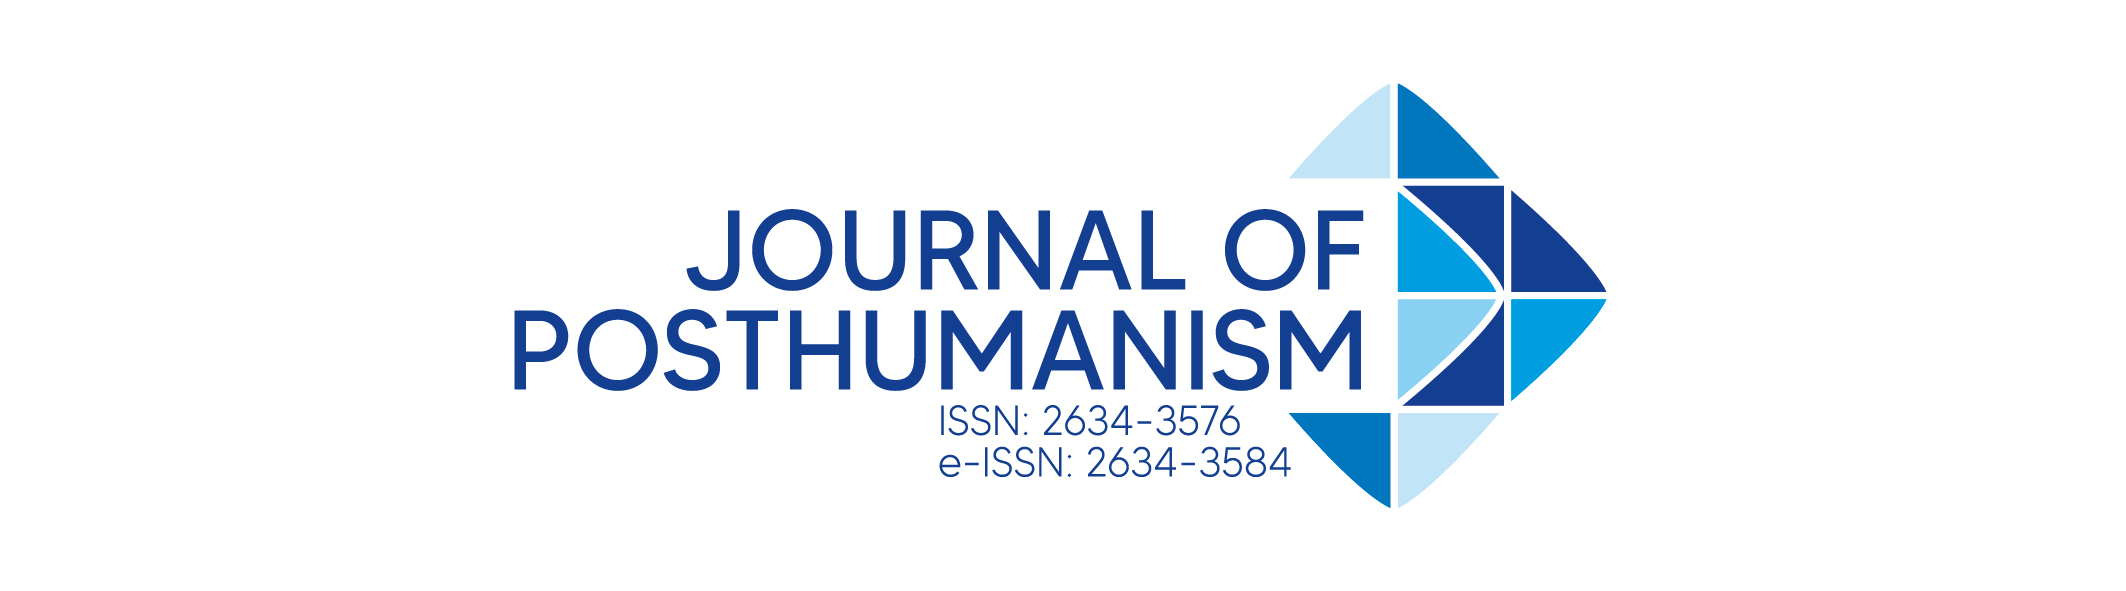 Journal of Posthumanism Cover Image